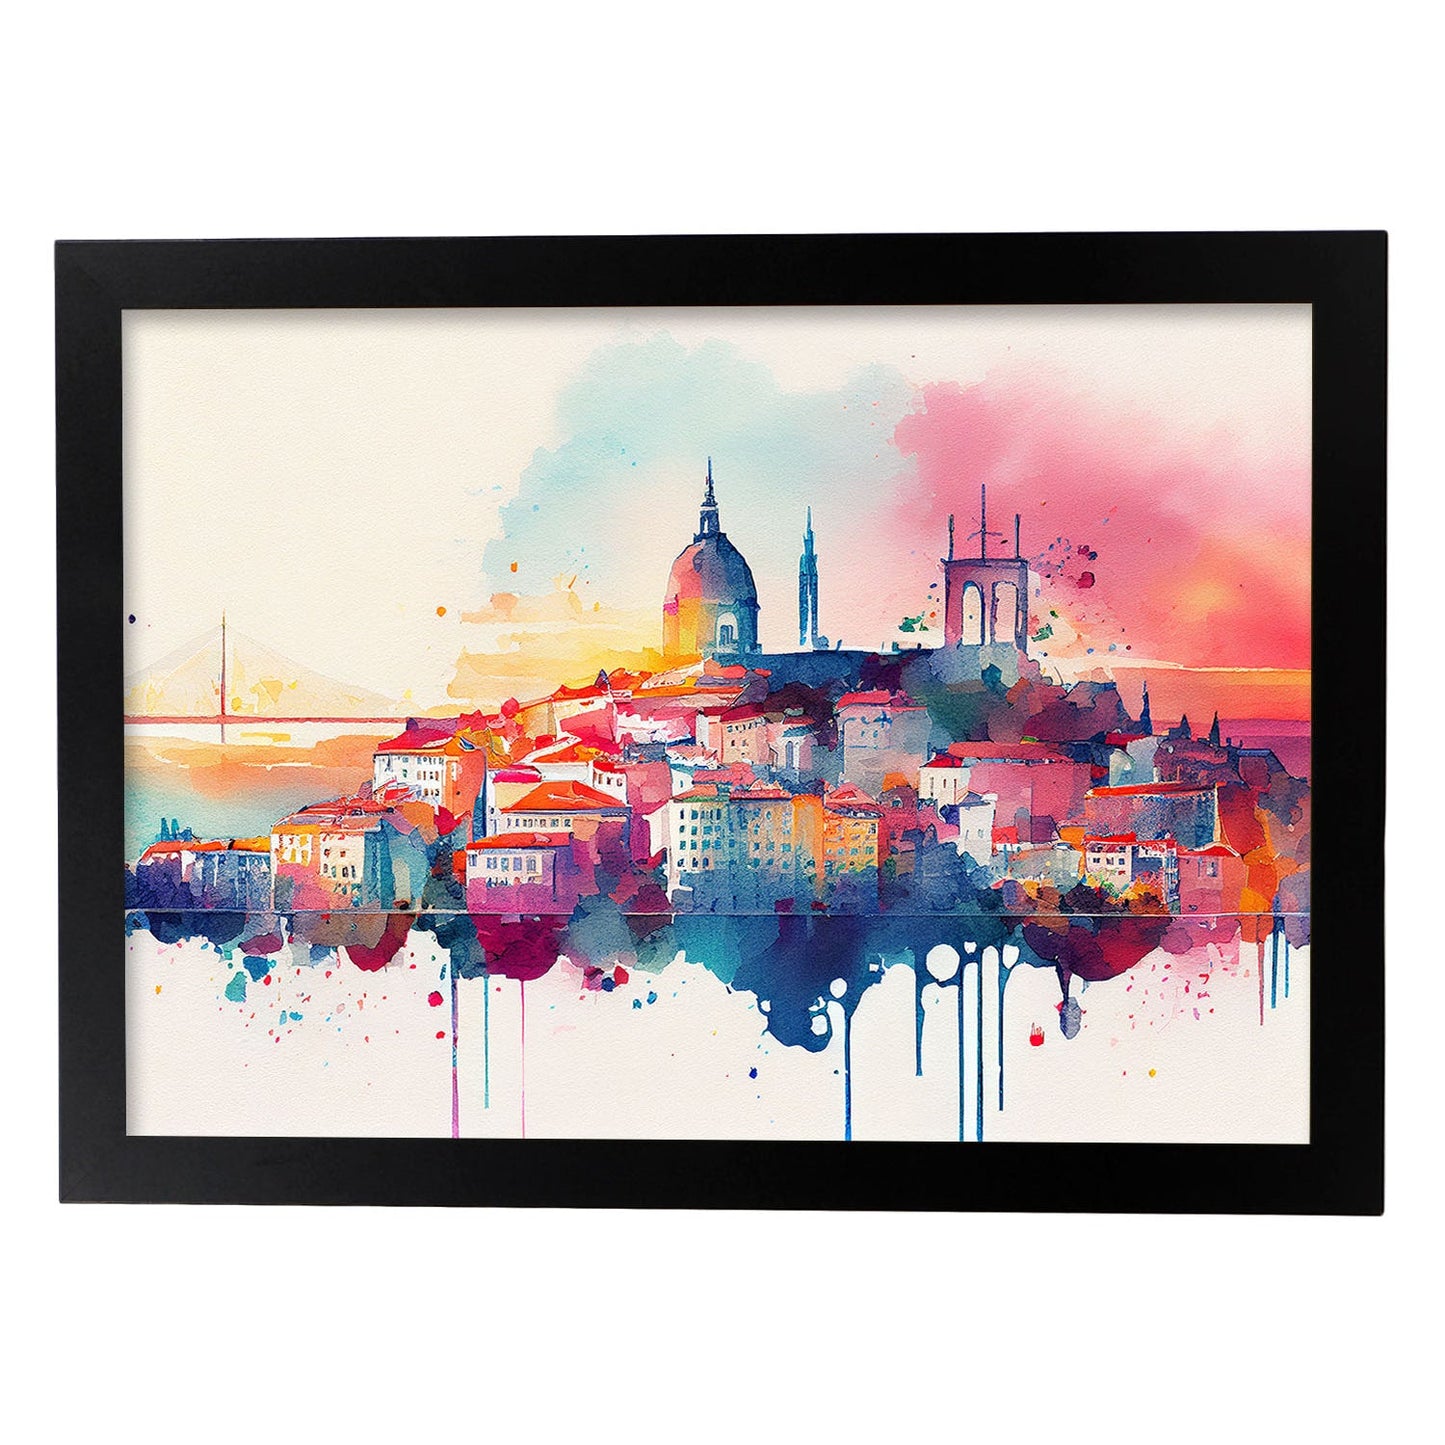 Nacnic watercolor of a skyline of the city of Lisbon_2. Aesthetic Wall Art Prints for Bedroom or Living Room Design.